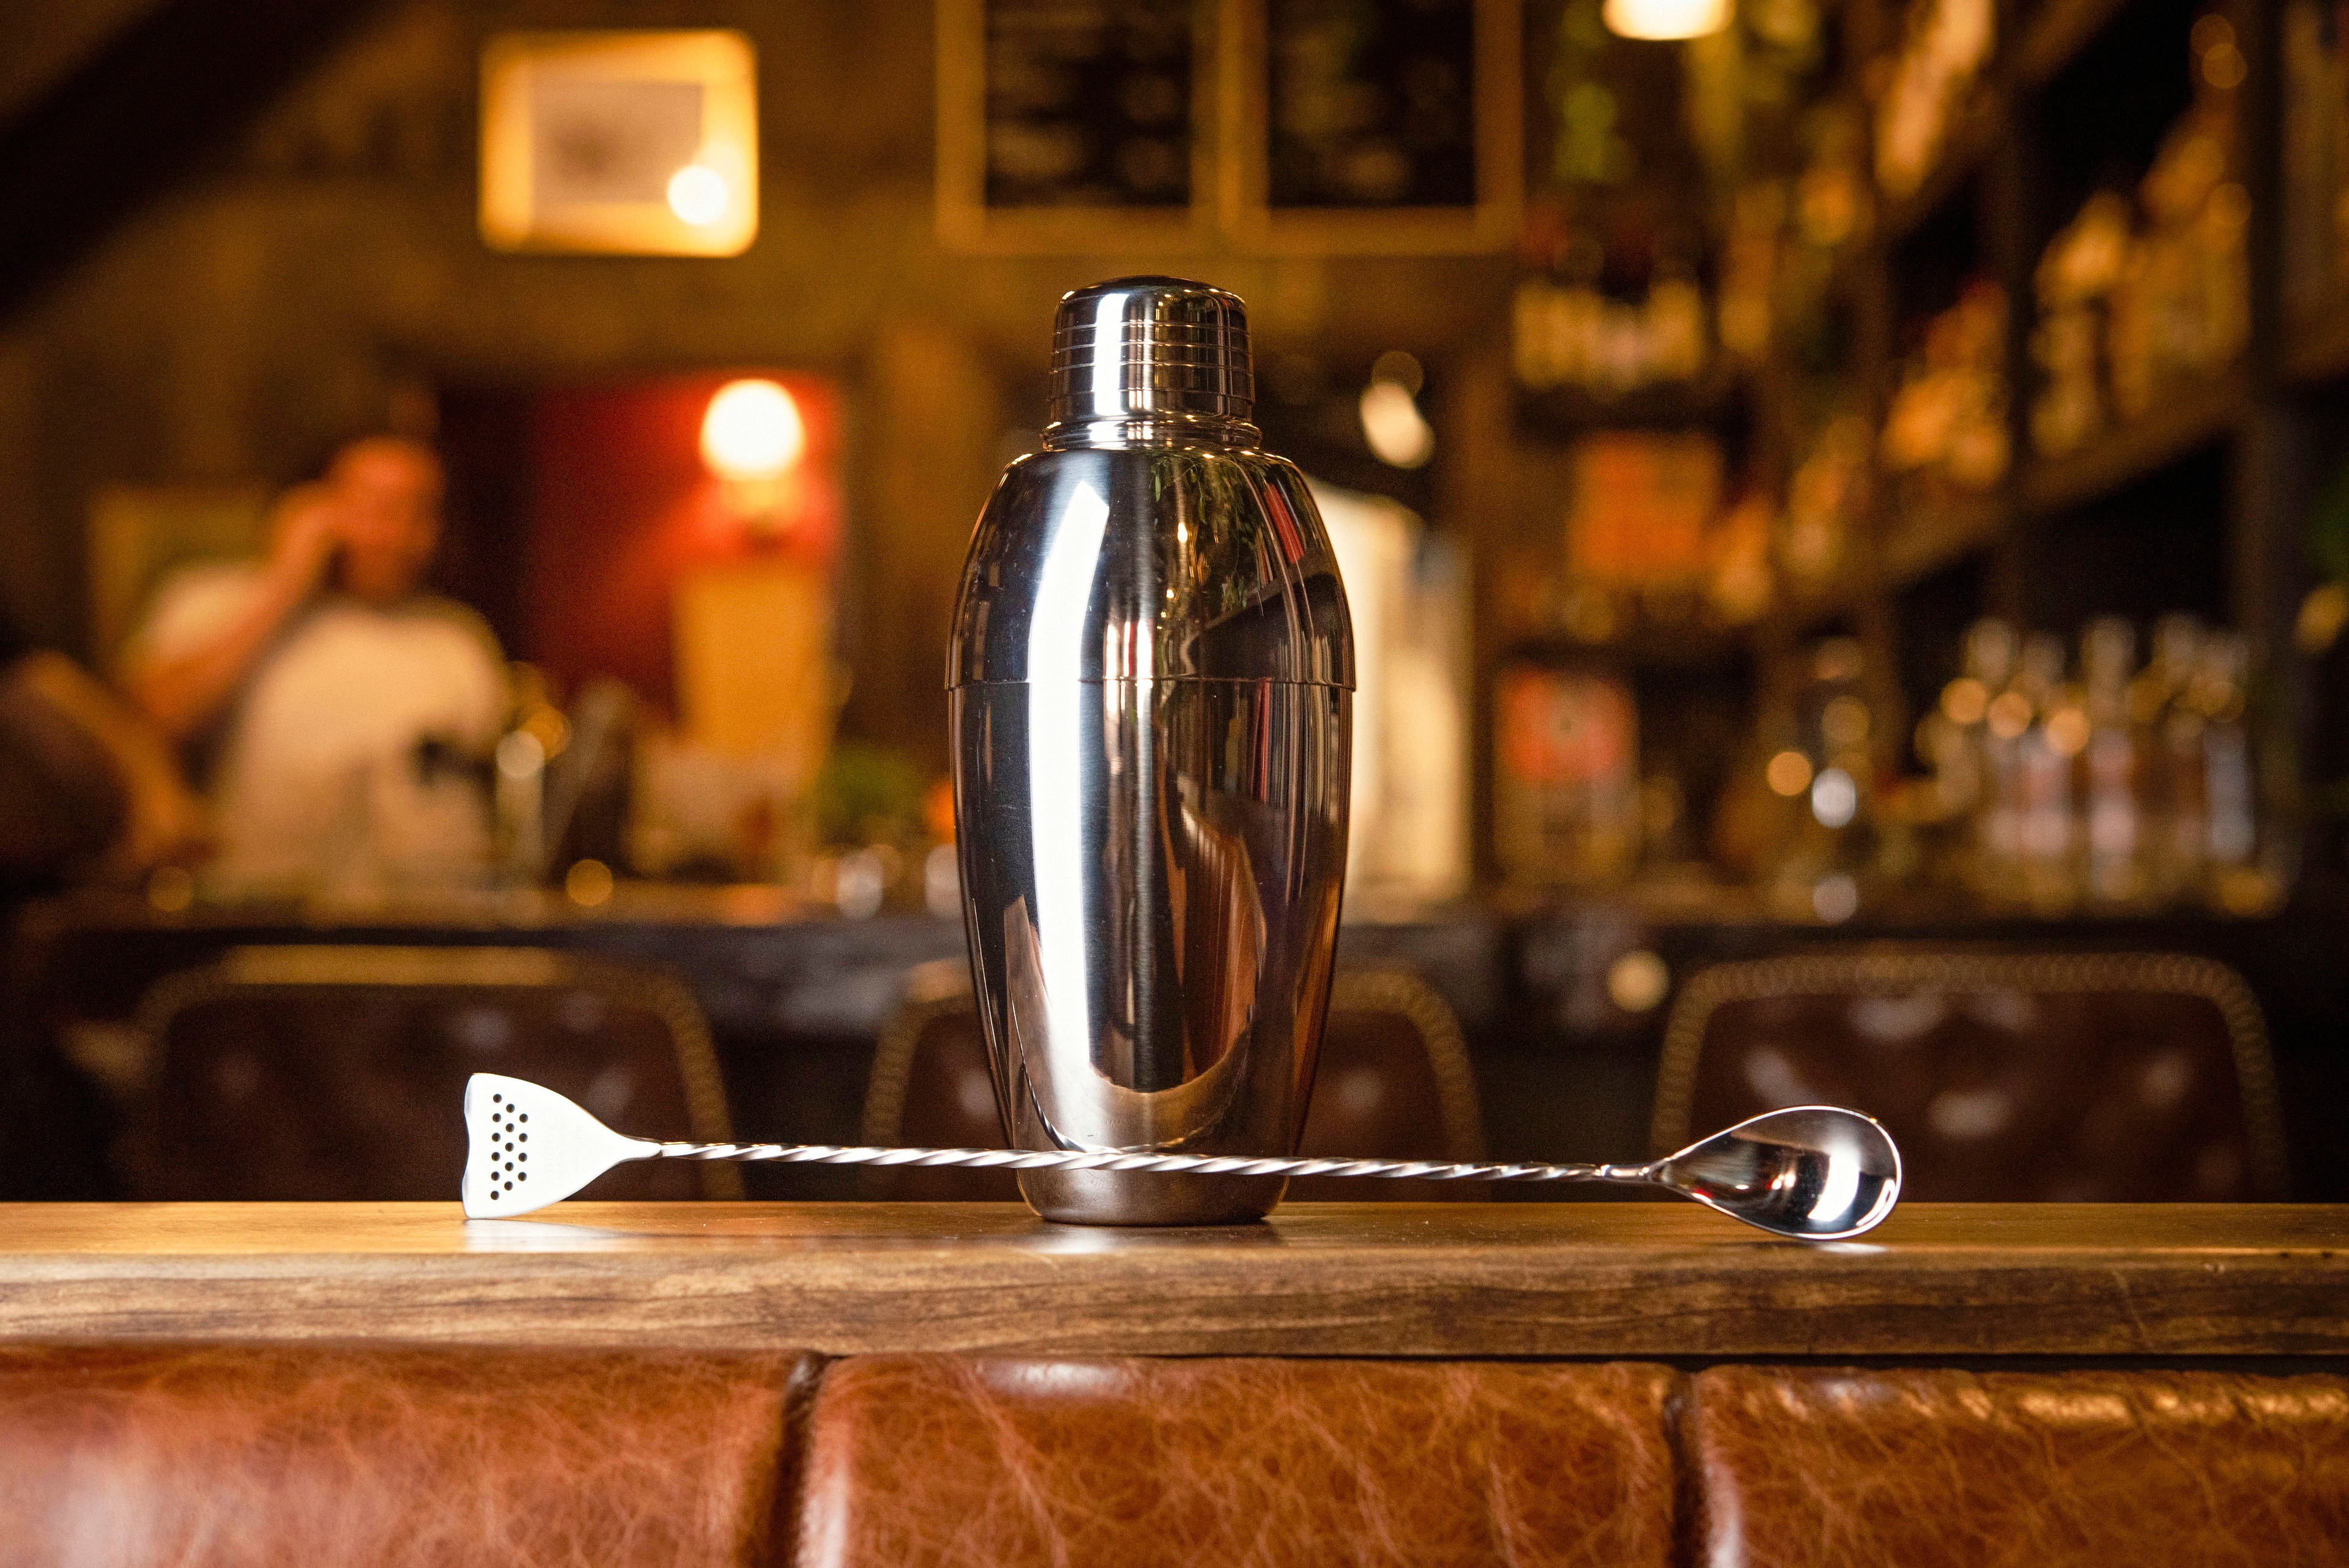 BIRDY SHAKER AND BIRDY BAR SPOON BY ERIC LORINCZ AVAILABLE AT BARGEEK AUSTRALIA